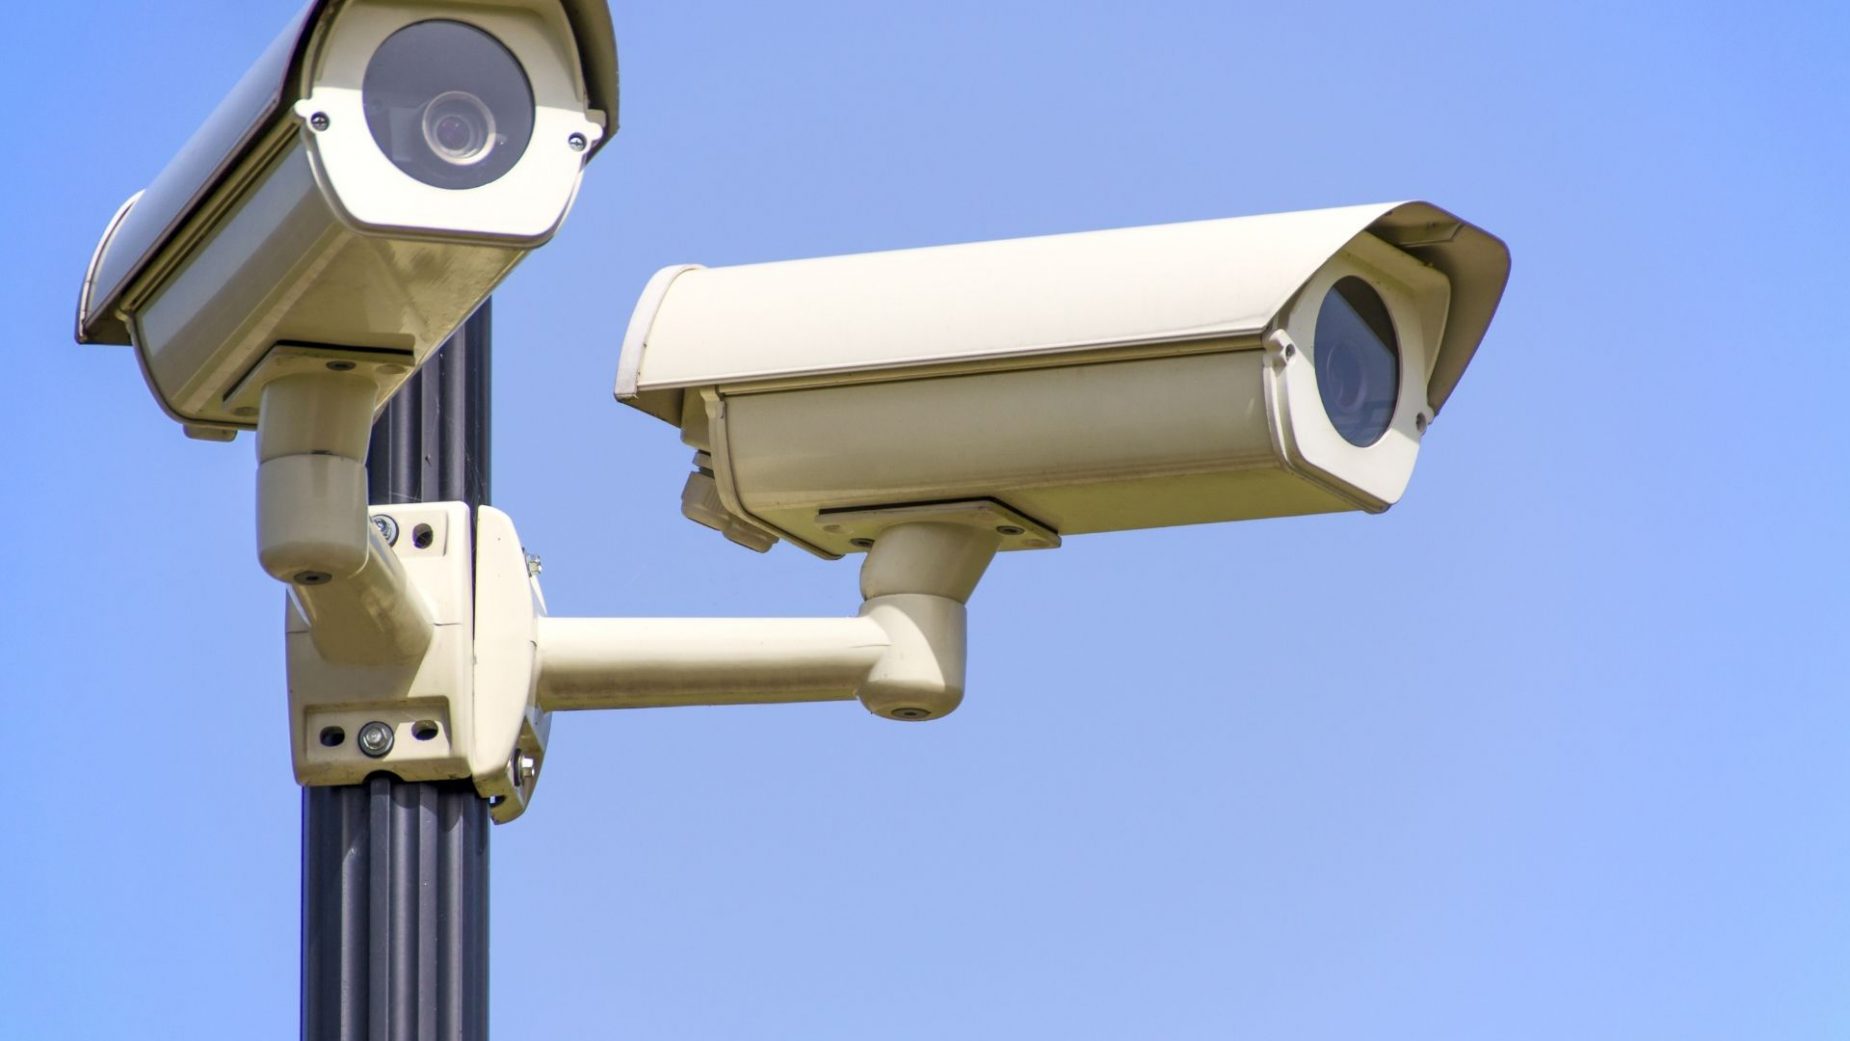 Global Video Surveillance As A Service (VSaaS) Market Outlook, Opportunities And Strategies